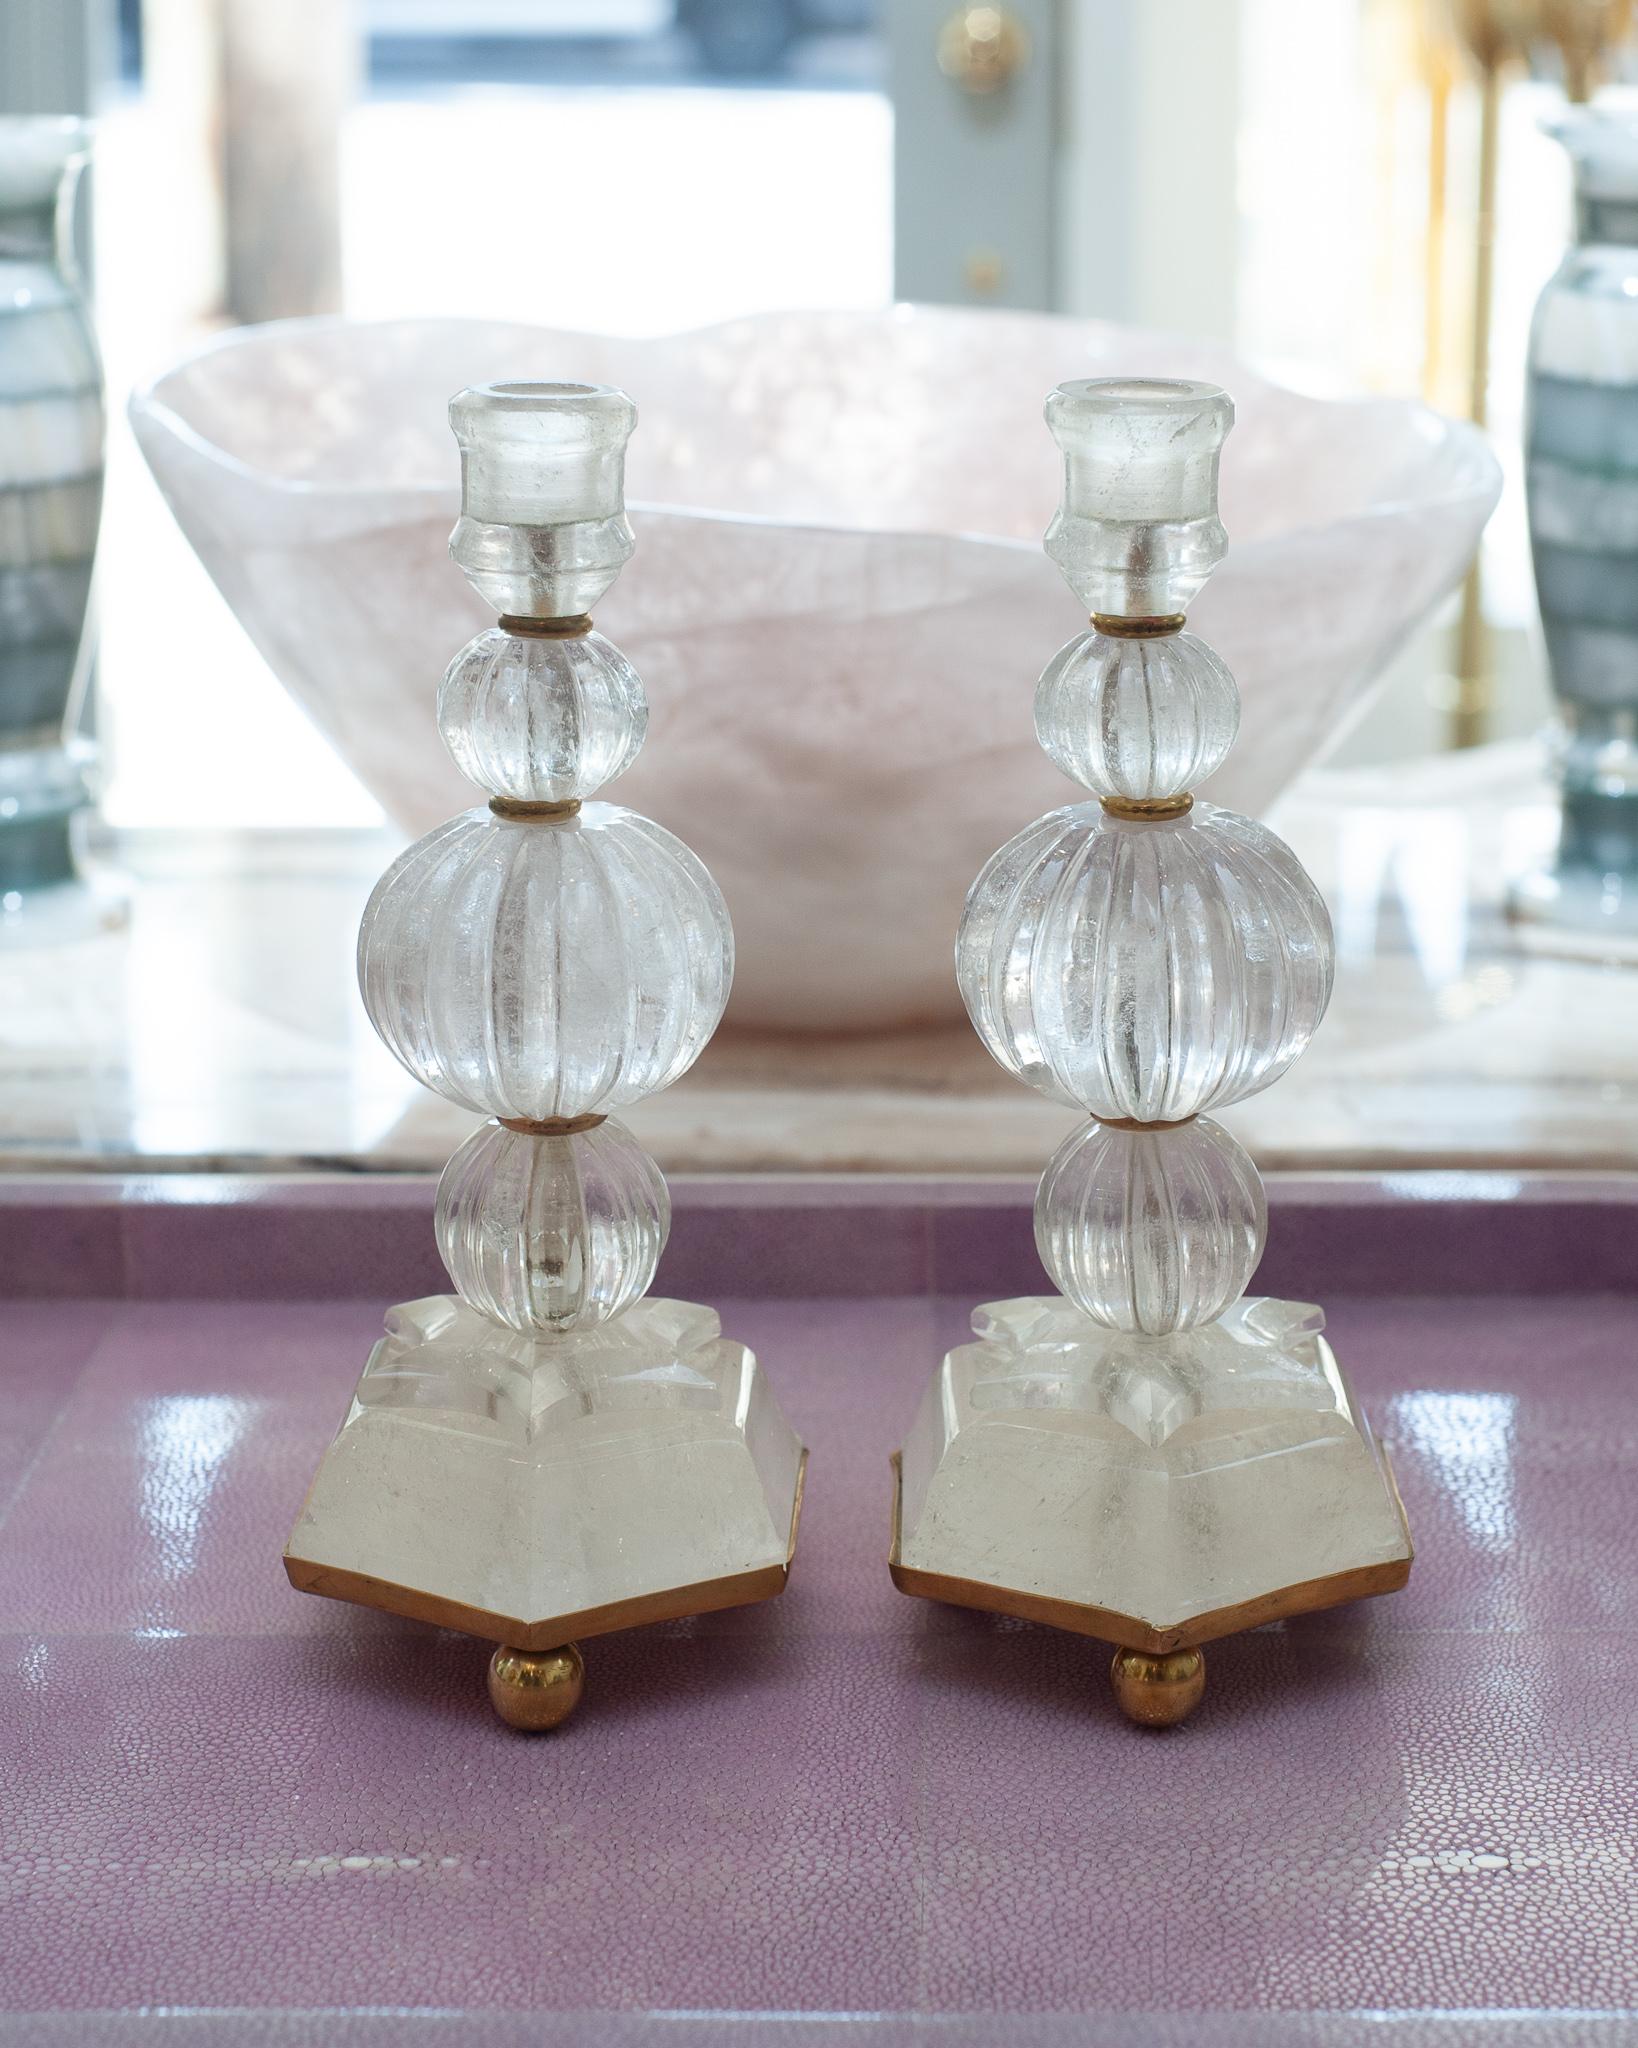 This pair of rock crystal and bronze candlesticks was sourced in Paris. Each feature scalloped rock crystal balls and carved rock crystal star motifs with brass base. Rock crystal has long been used in decoration and many ornate pieces are exhibited